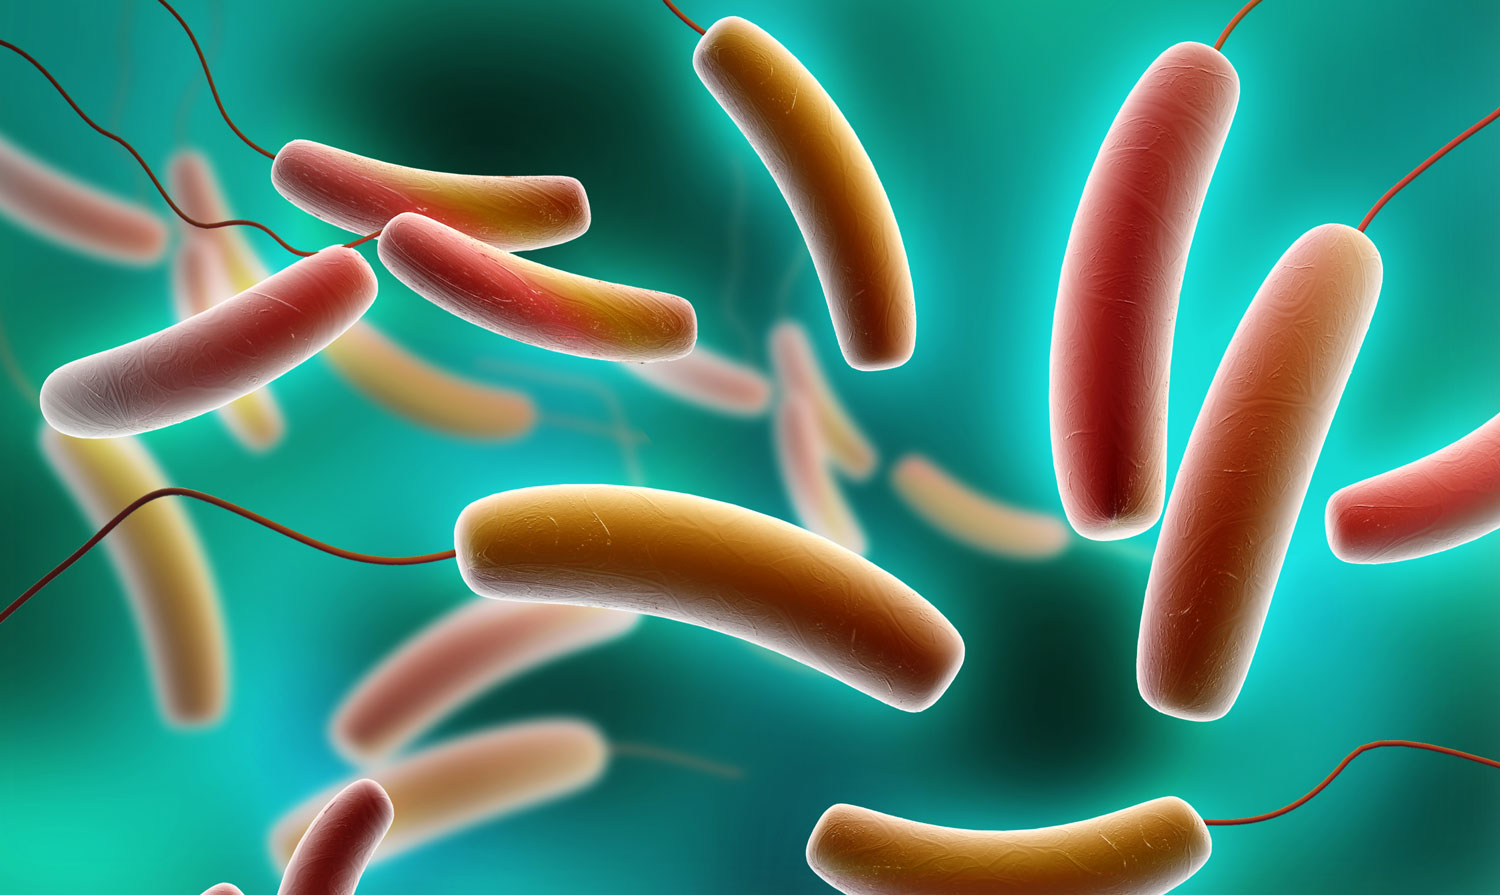 Antimicrobial resistance development in bacteria — like E. coli, (pictured above), can have devastating effects on human health.